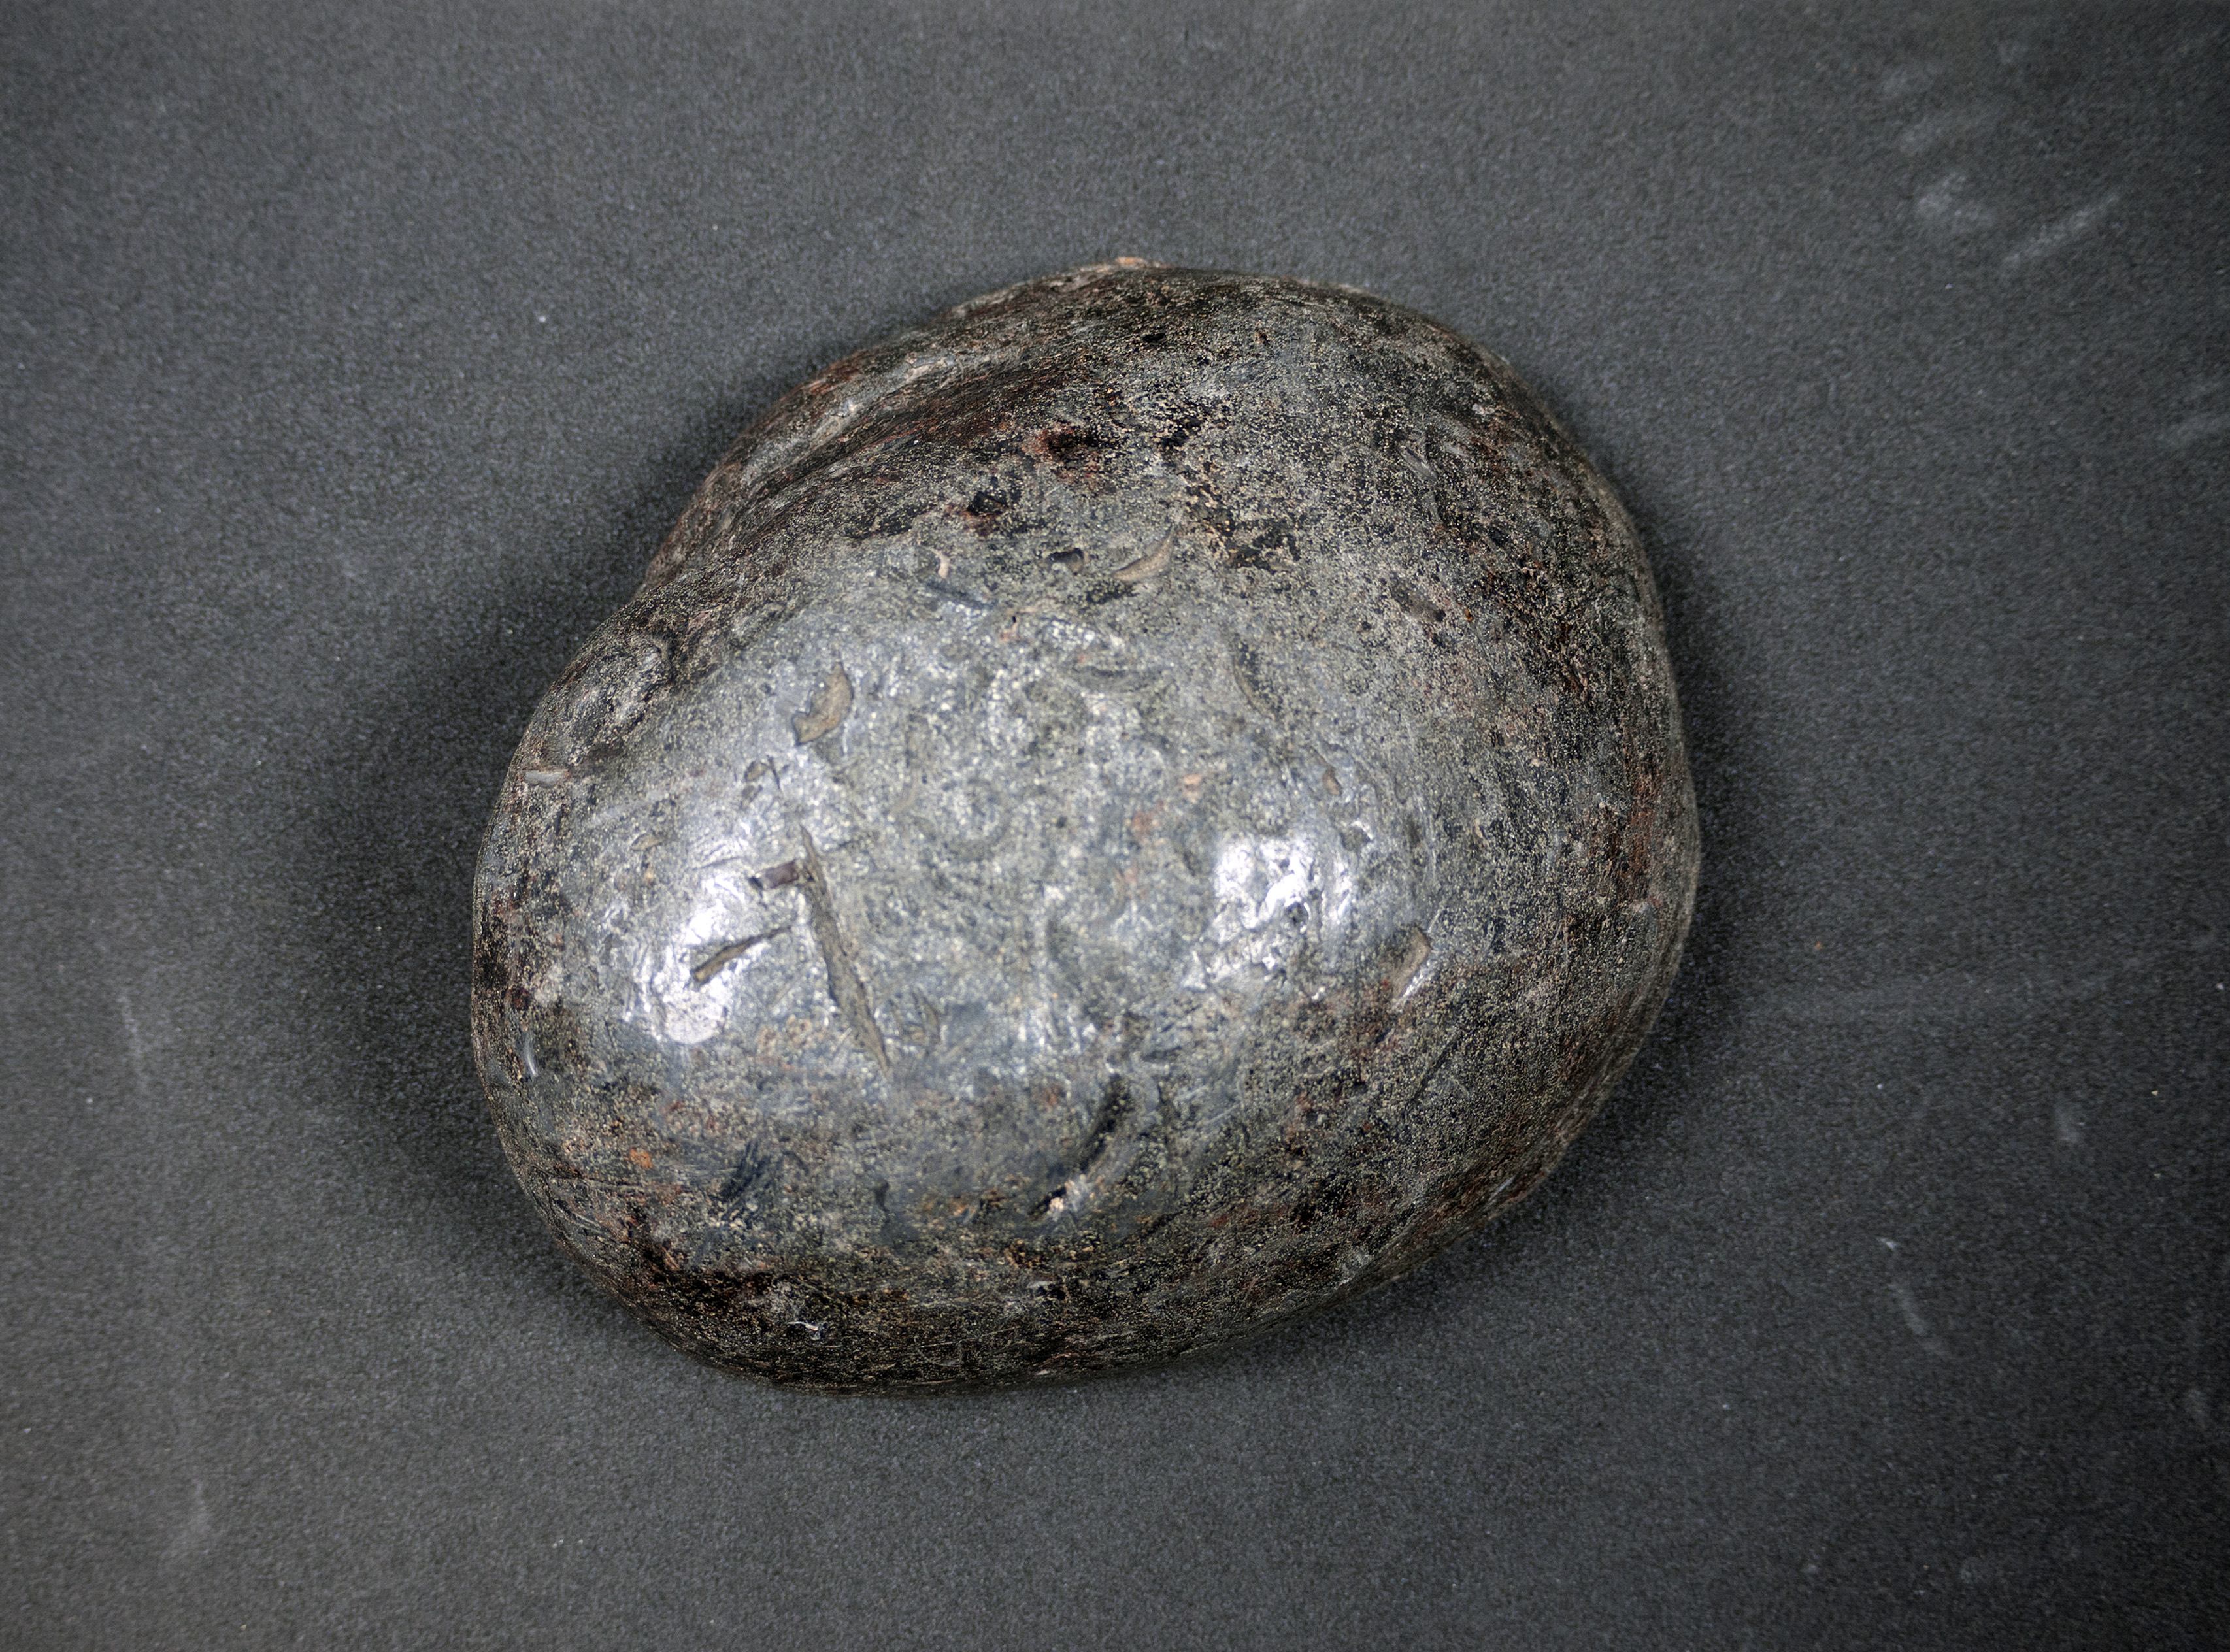 An irregular dome-shaped lump of lead on a cushion, viewed from above.